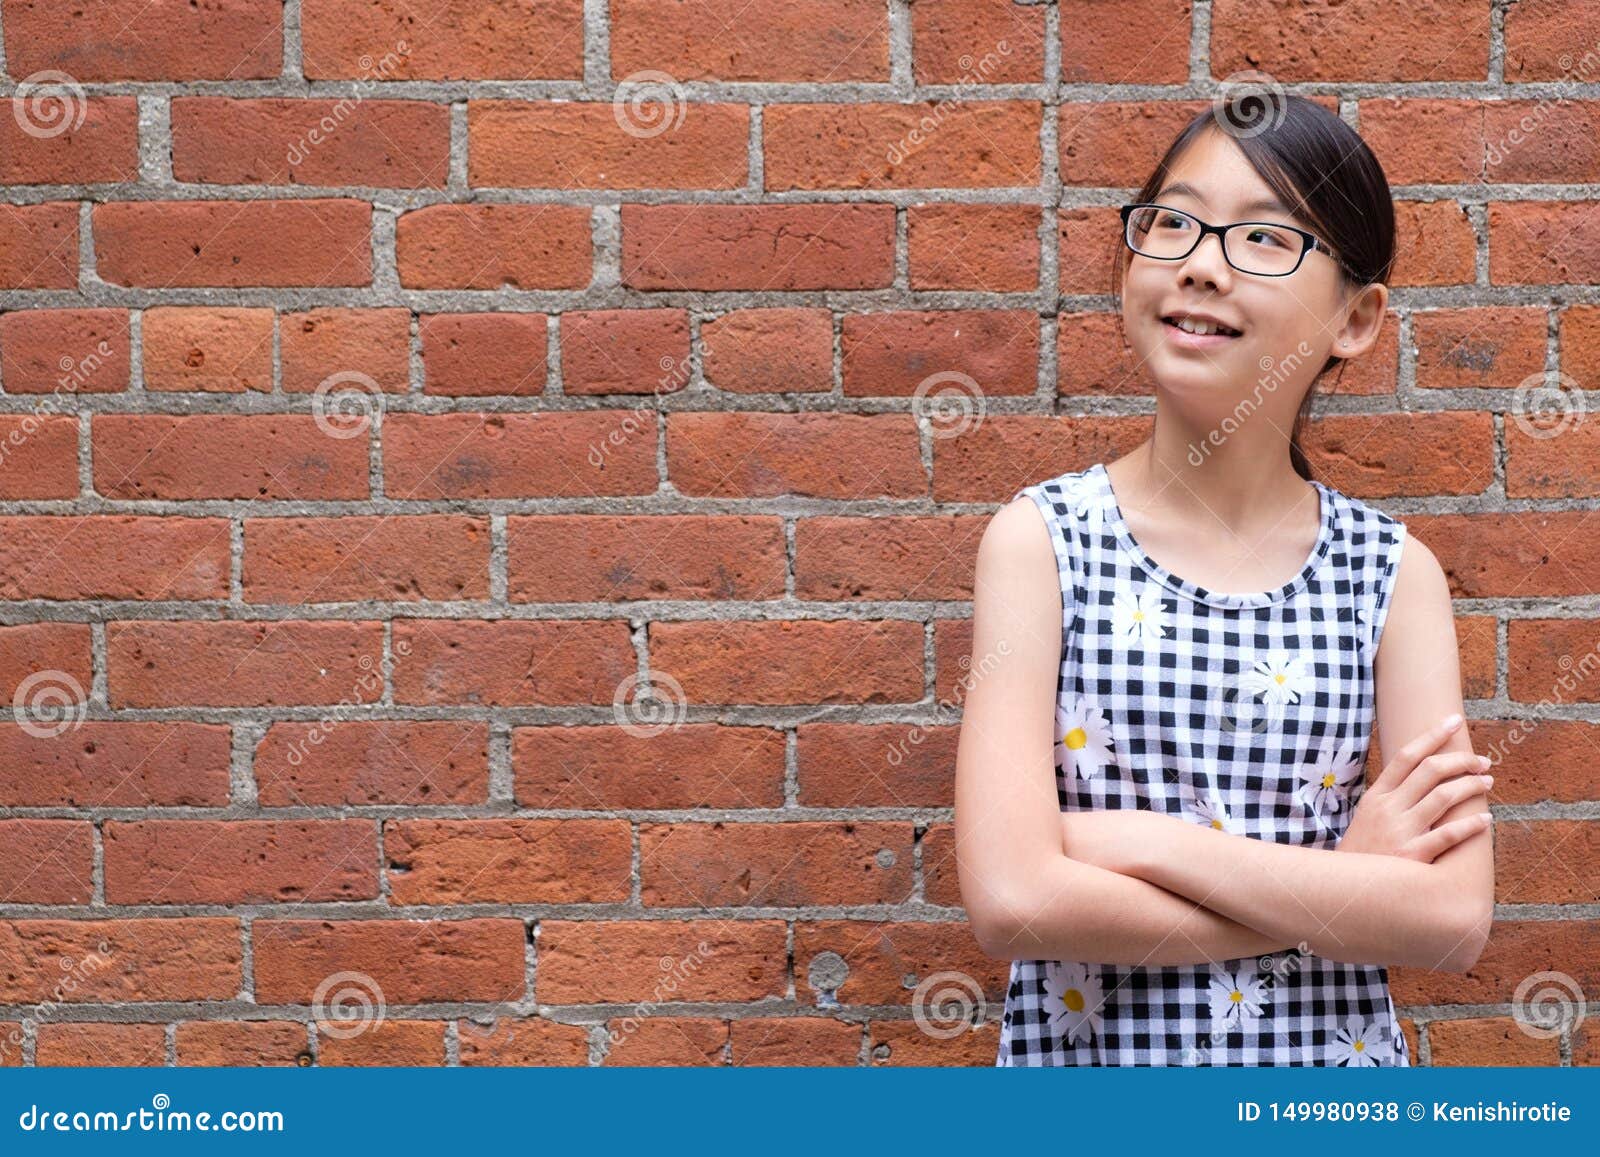 Portrait Of Young Asian Girl Against White Brick Wall 